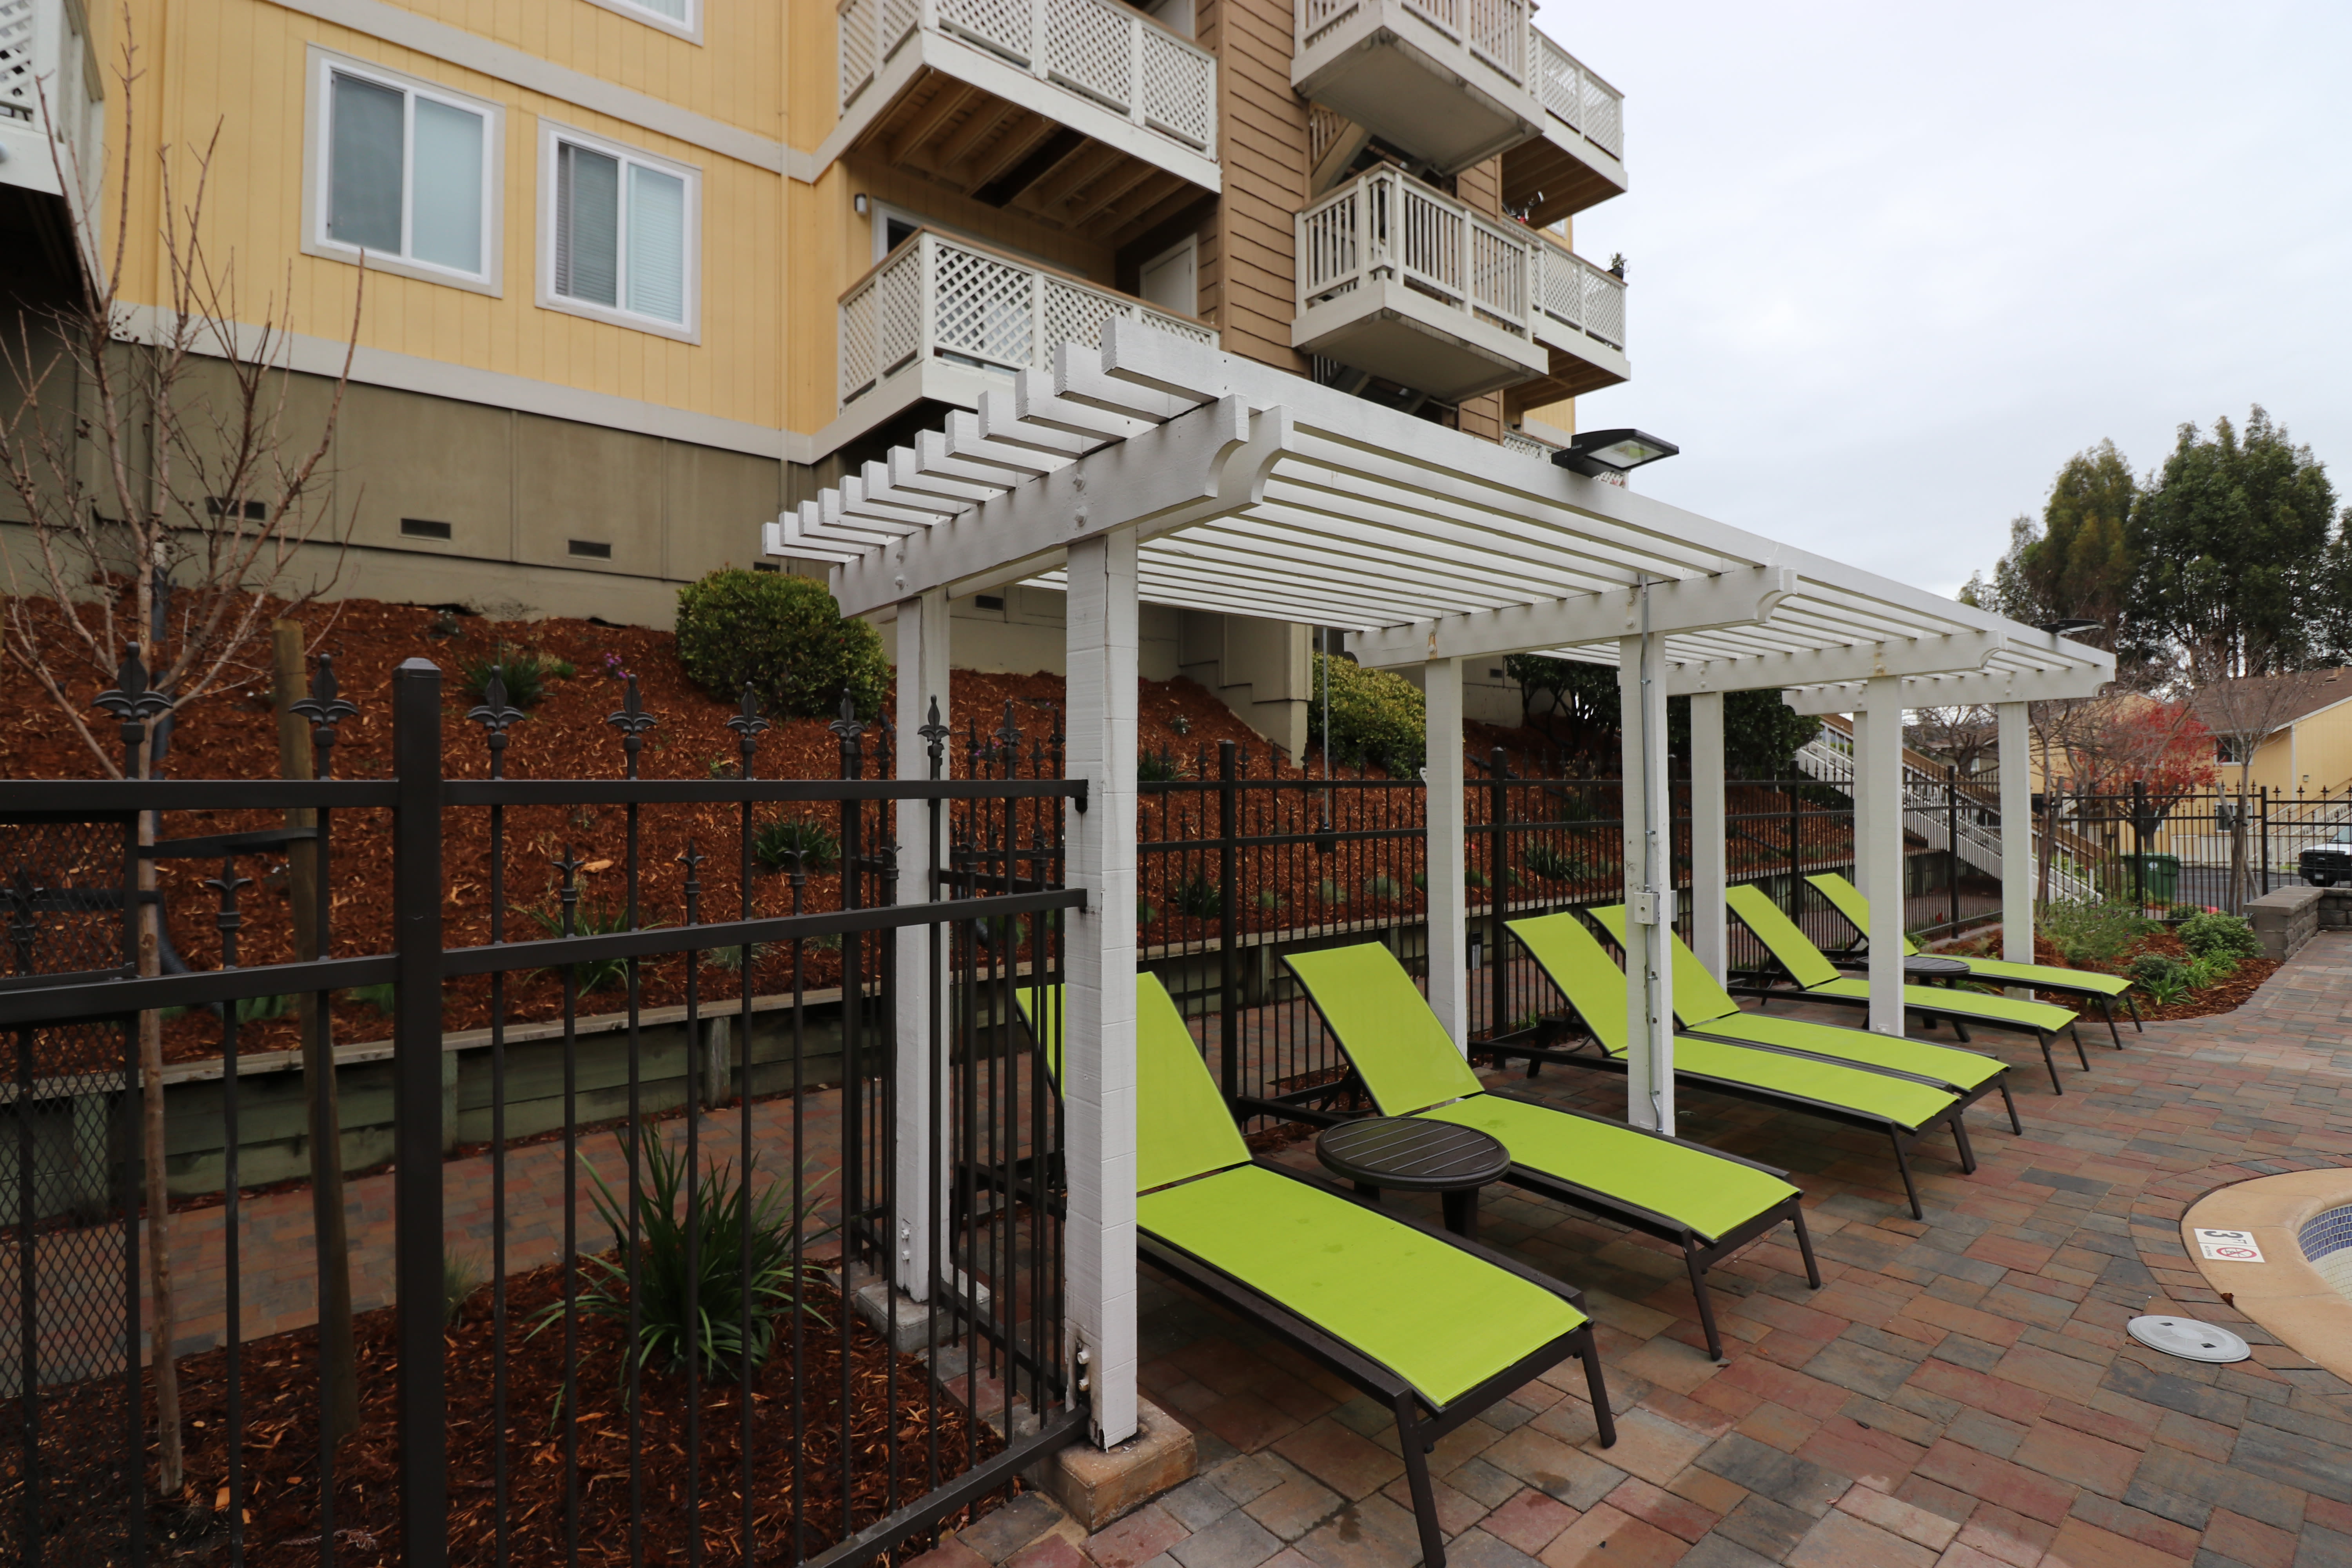 Chaise lounge chairs at Quail Hill Apartment Homes in Castro Valley, California